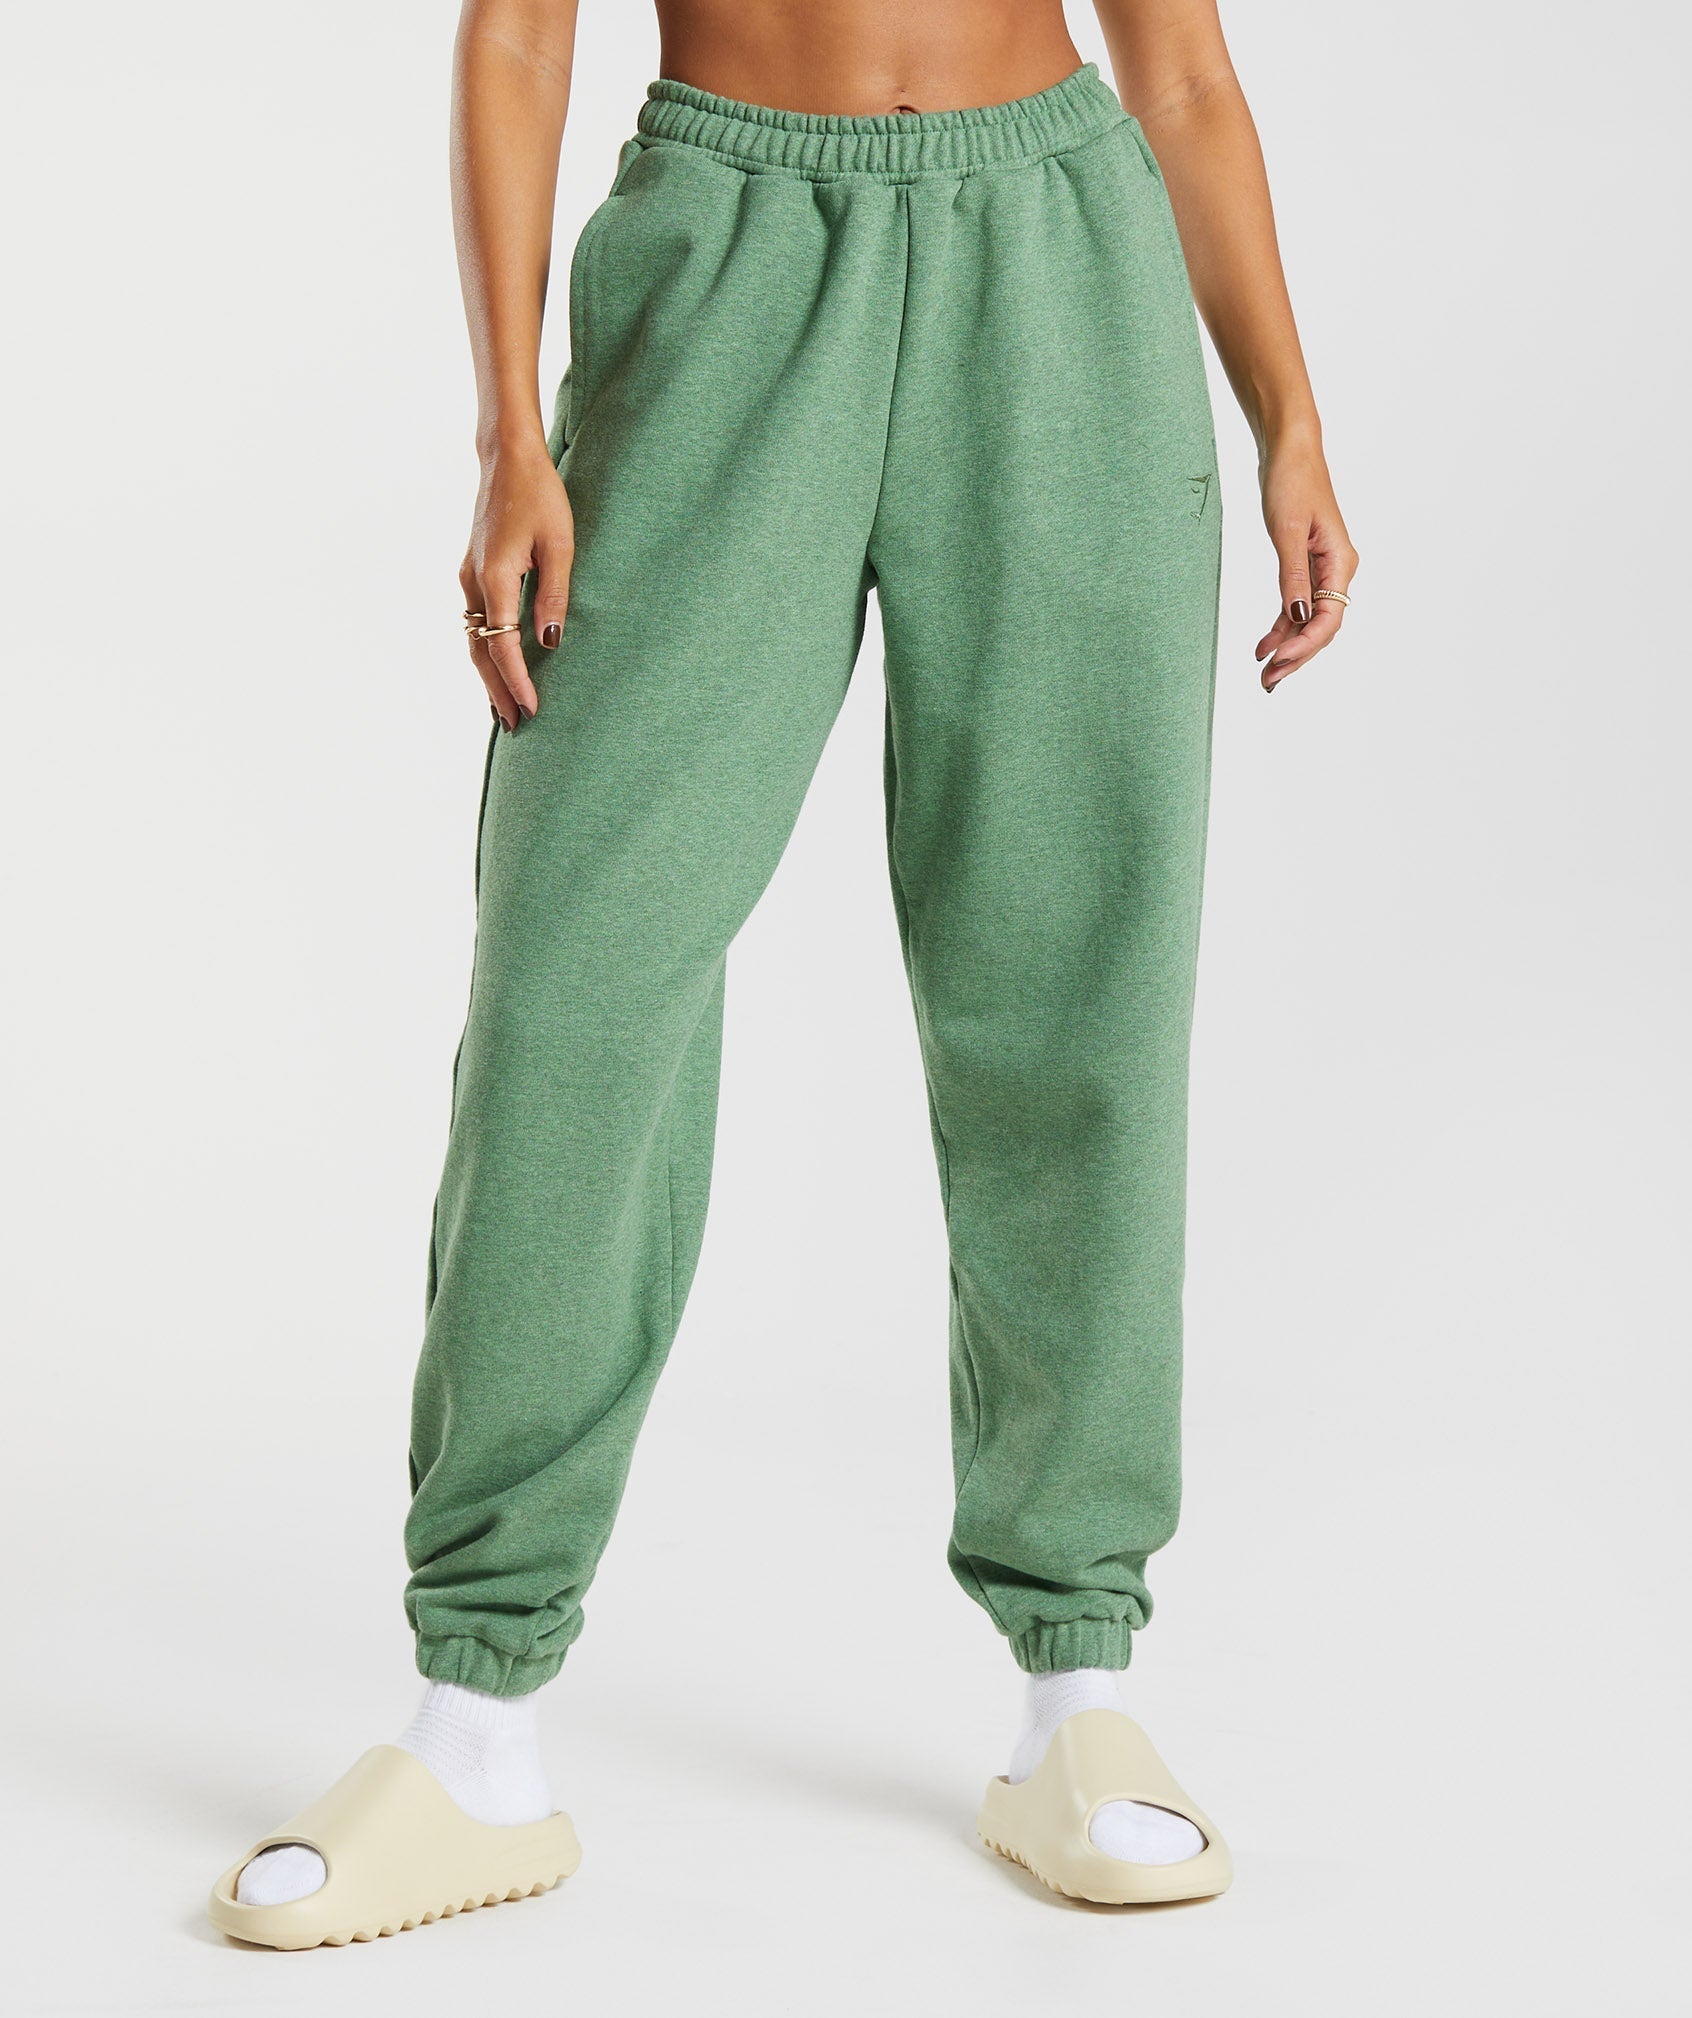 Rest Day Sweats Joggers in Crocodile Green Marl - view 1